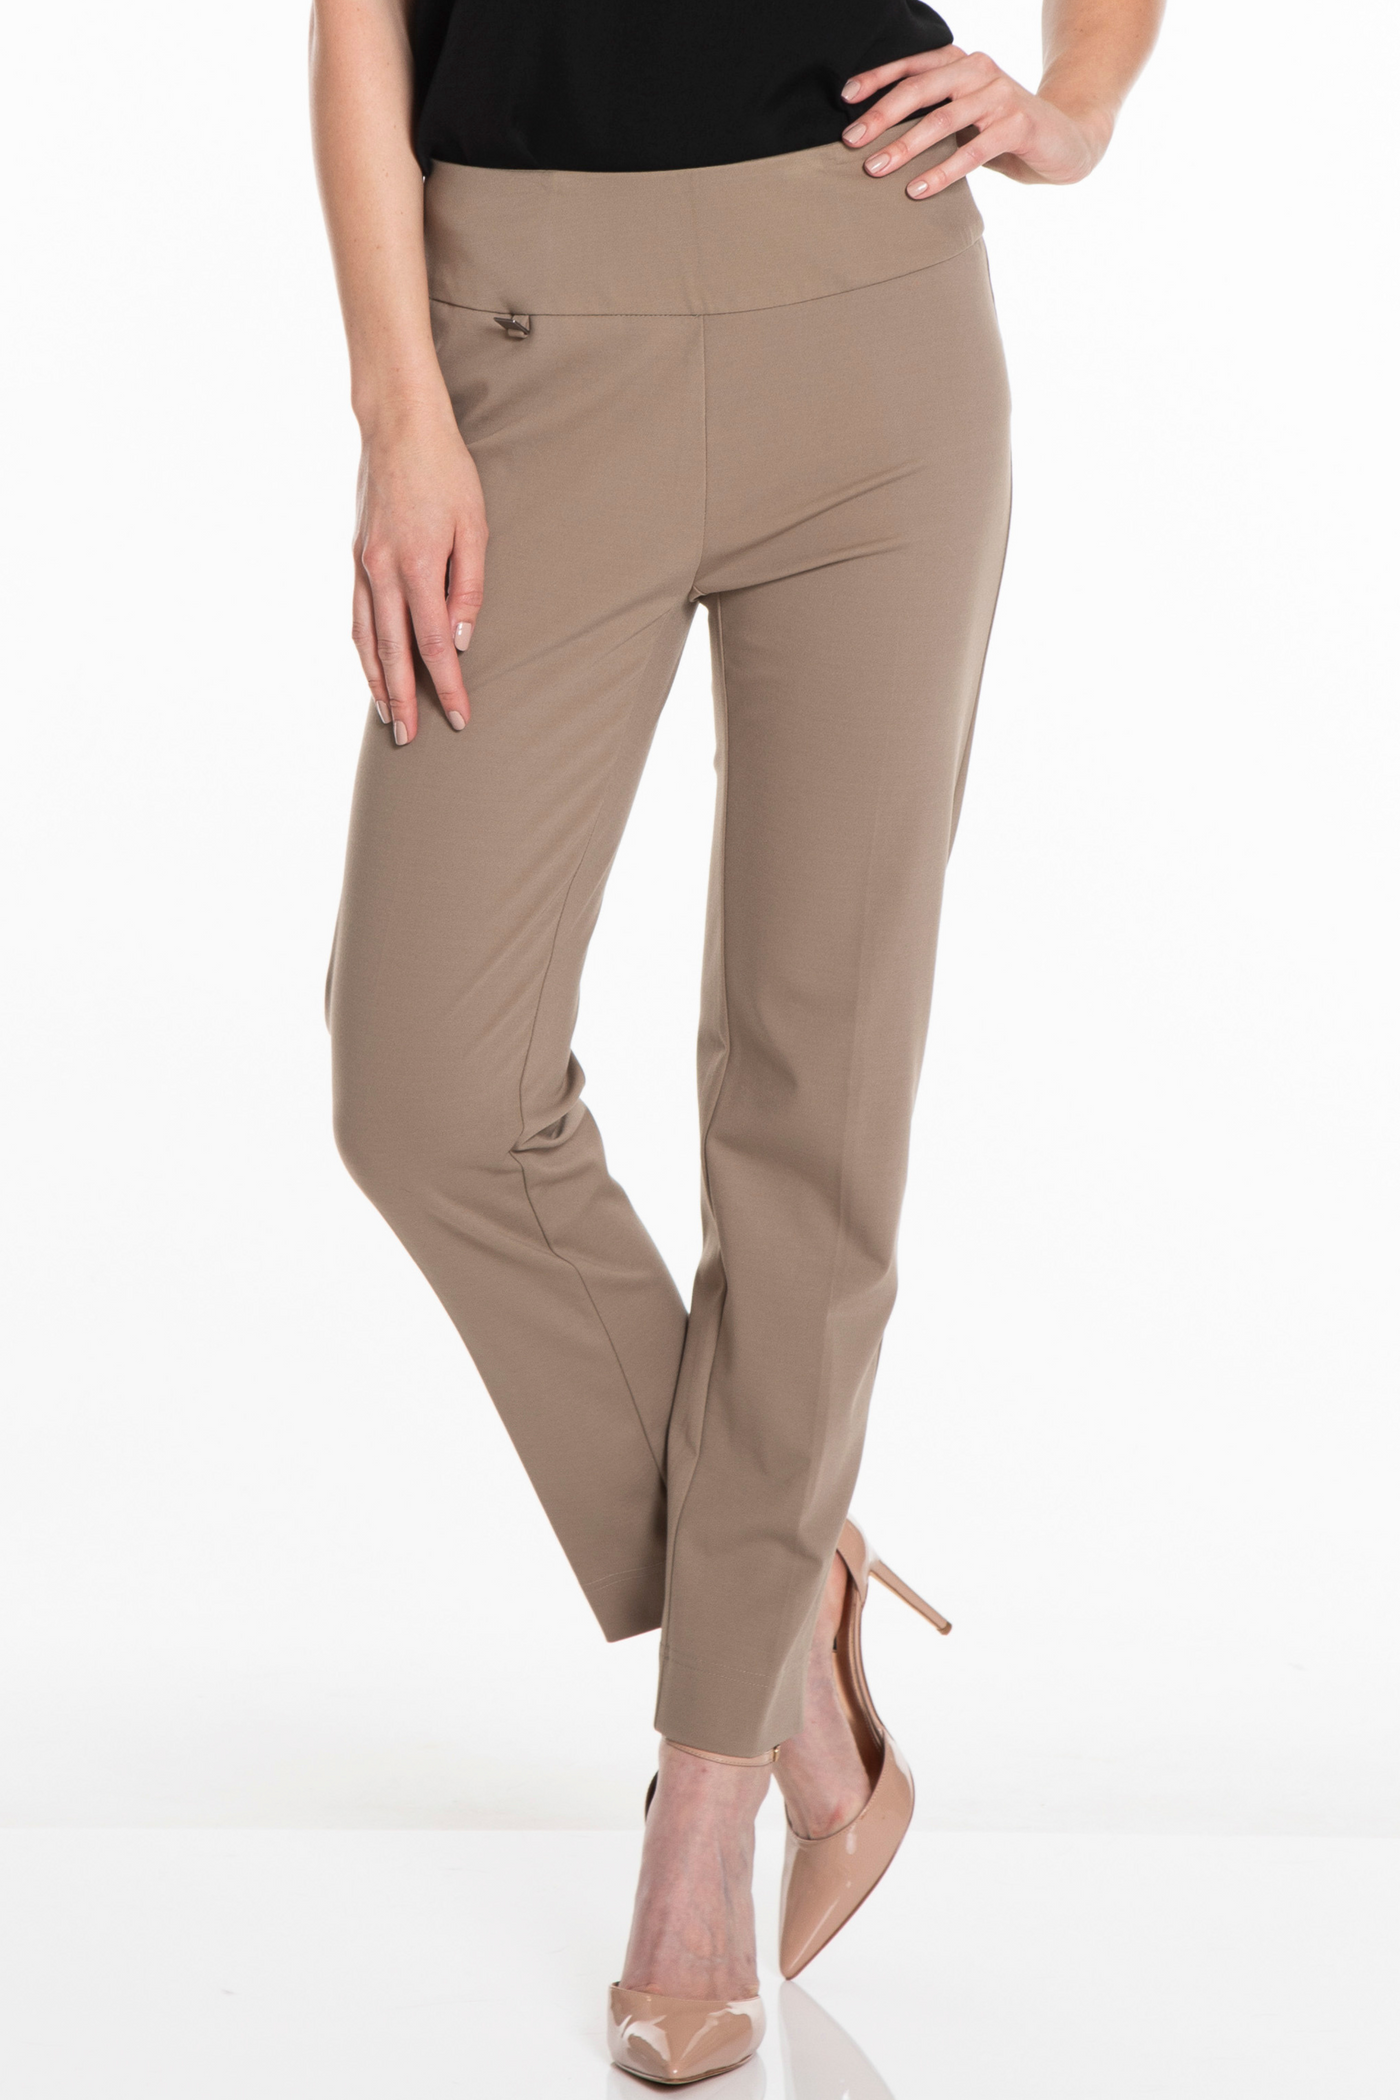 PLUS Pull-On Solid Ease-Y-Fit Knit Ankle Leg Pant - Truffle